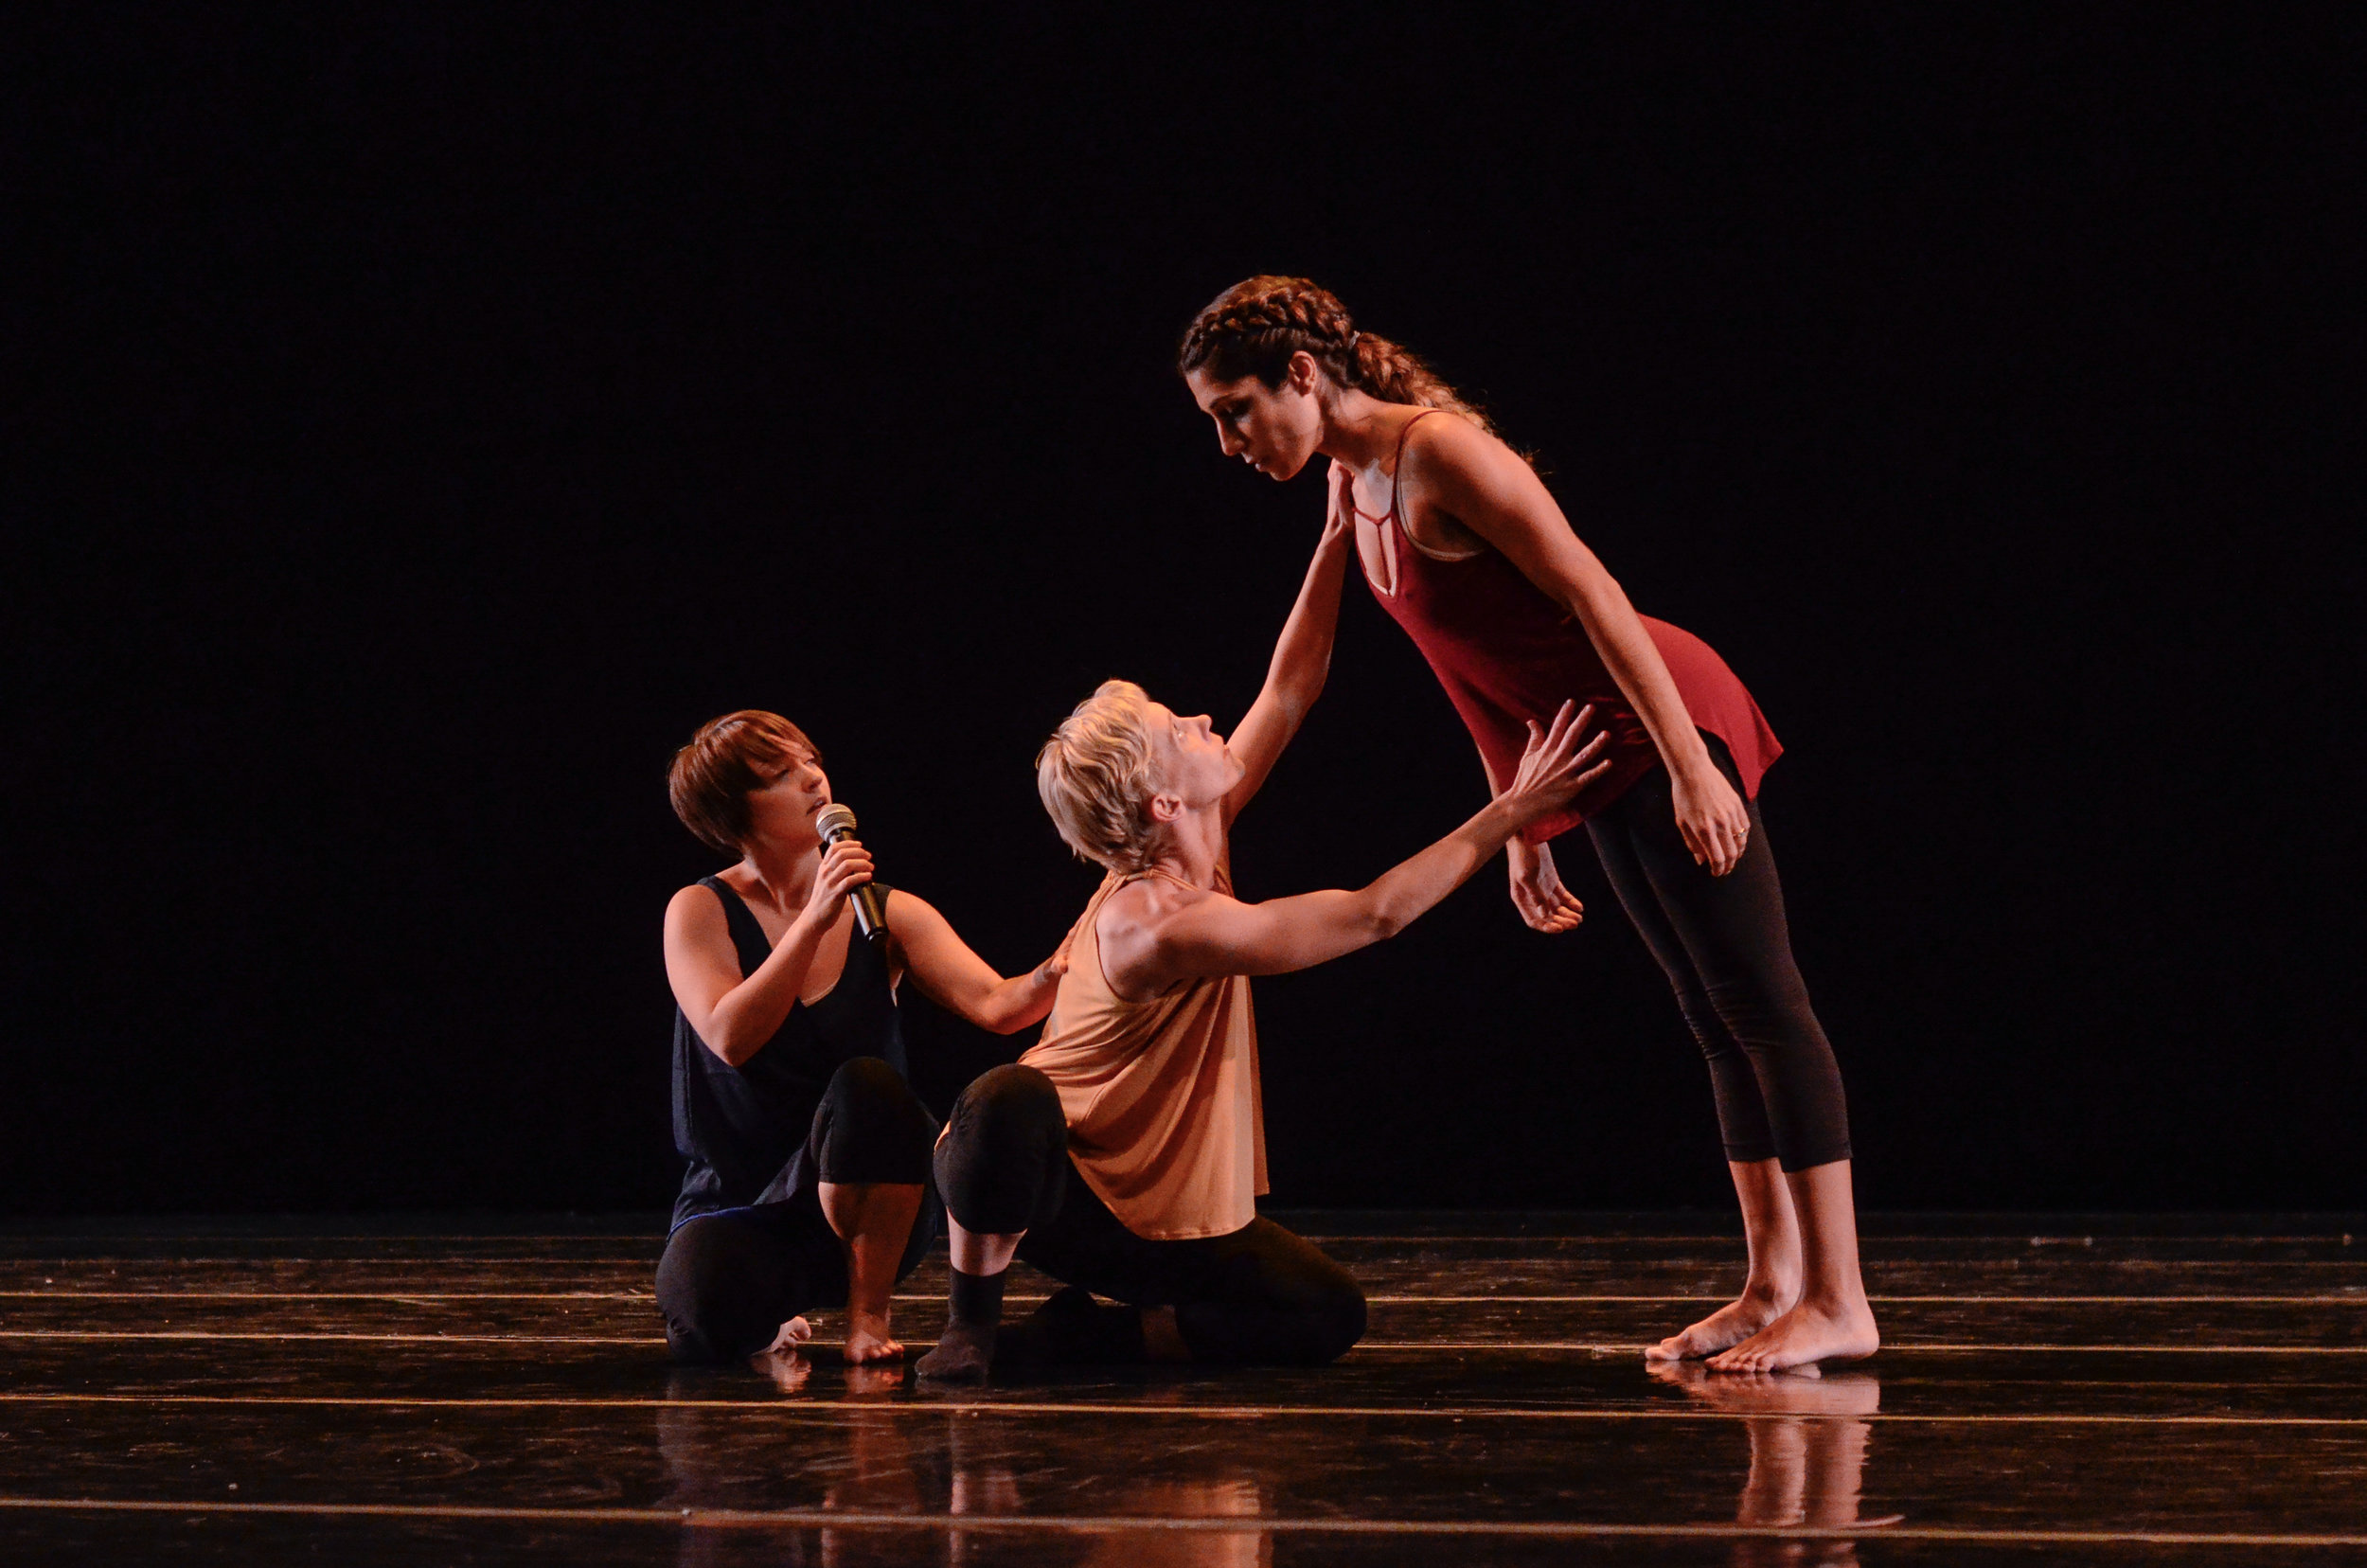 Mother Under - Best of Fest Award winning piece at the Exchange Choreography Festival 2016